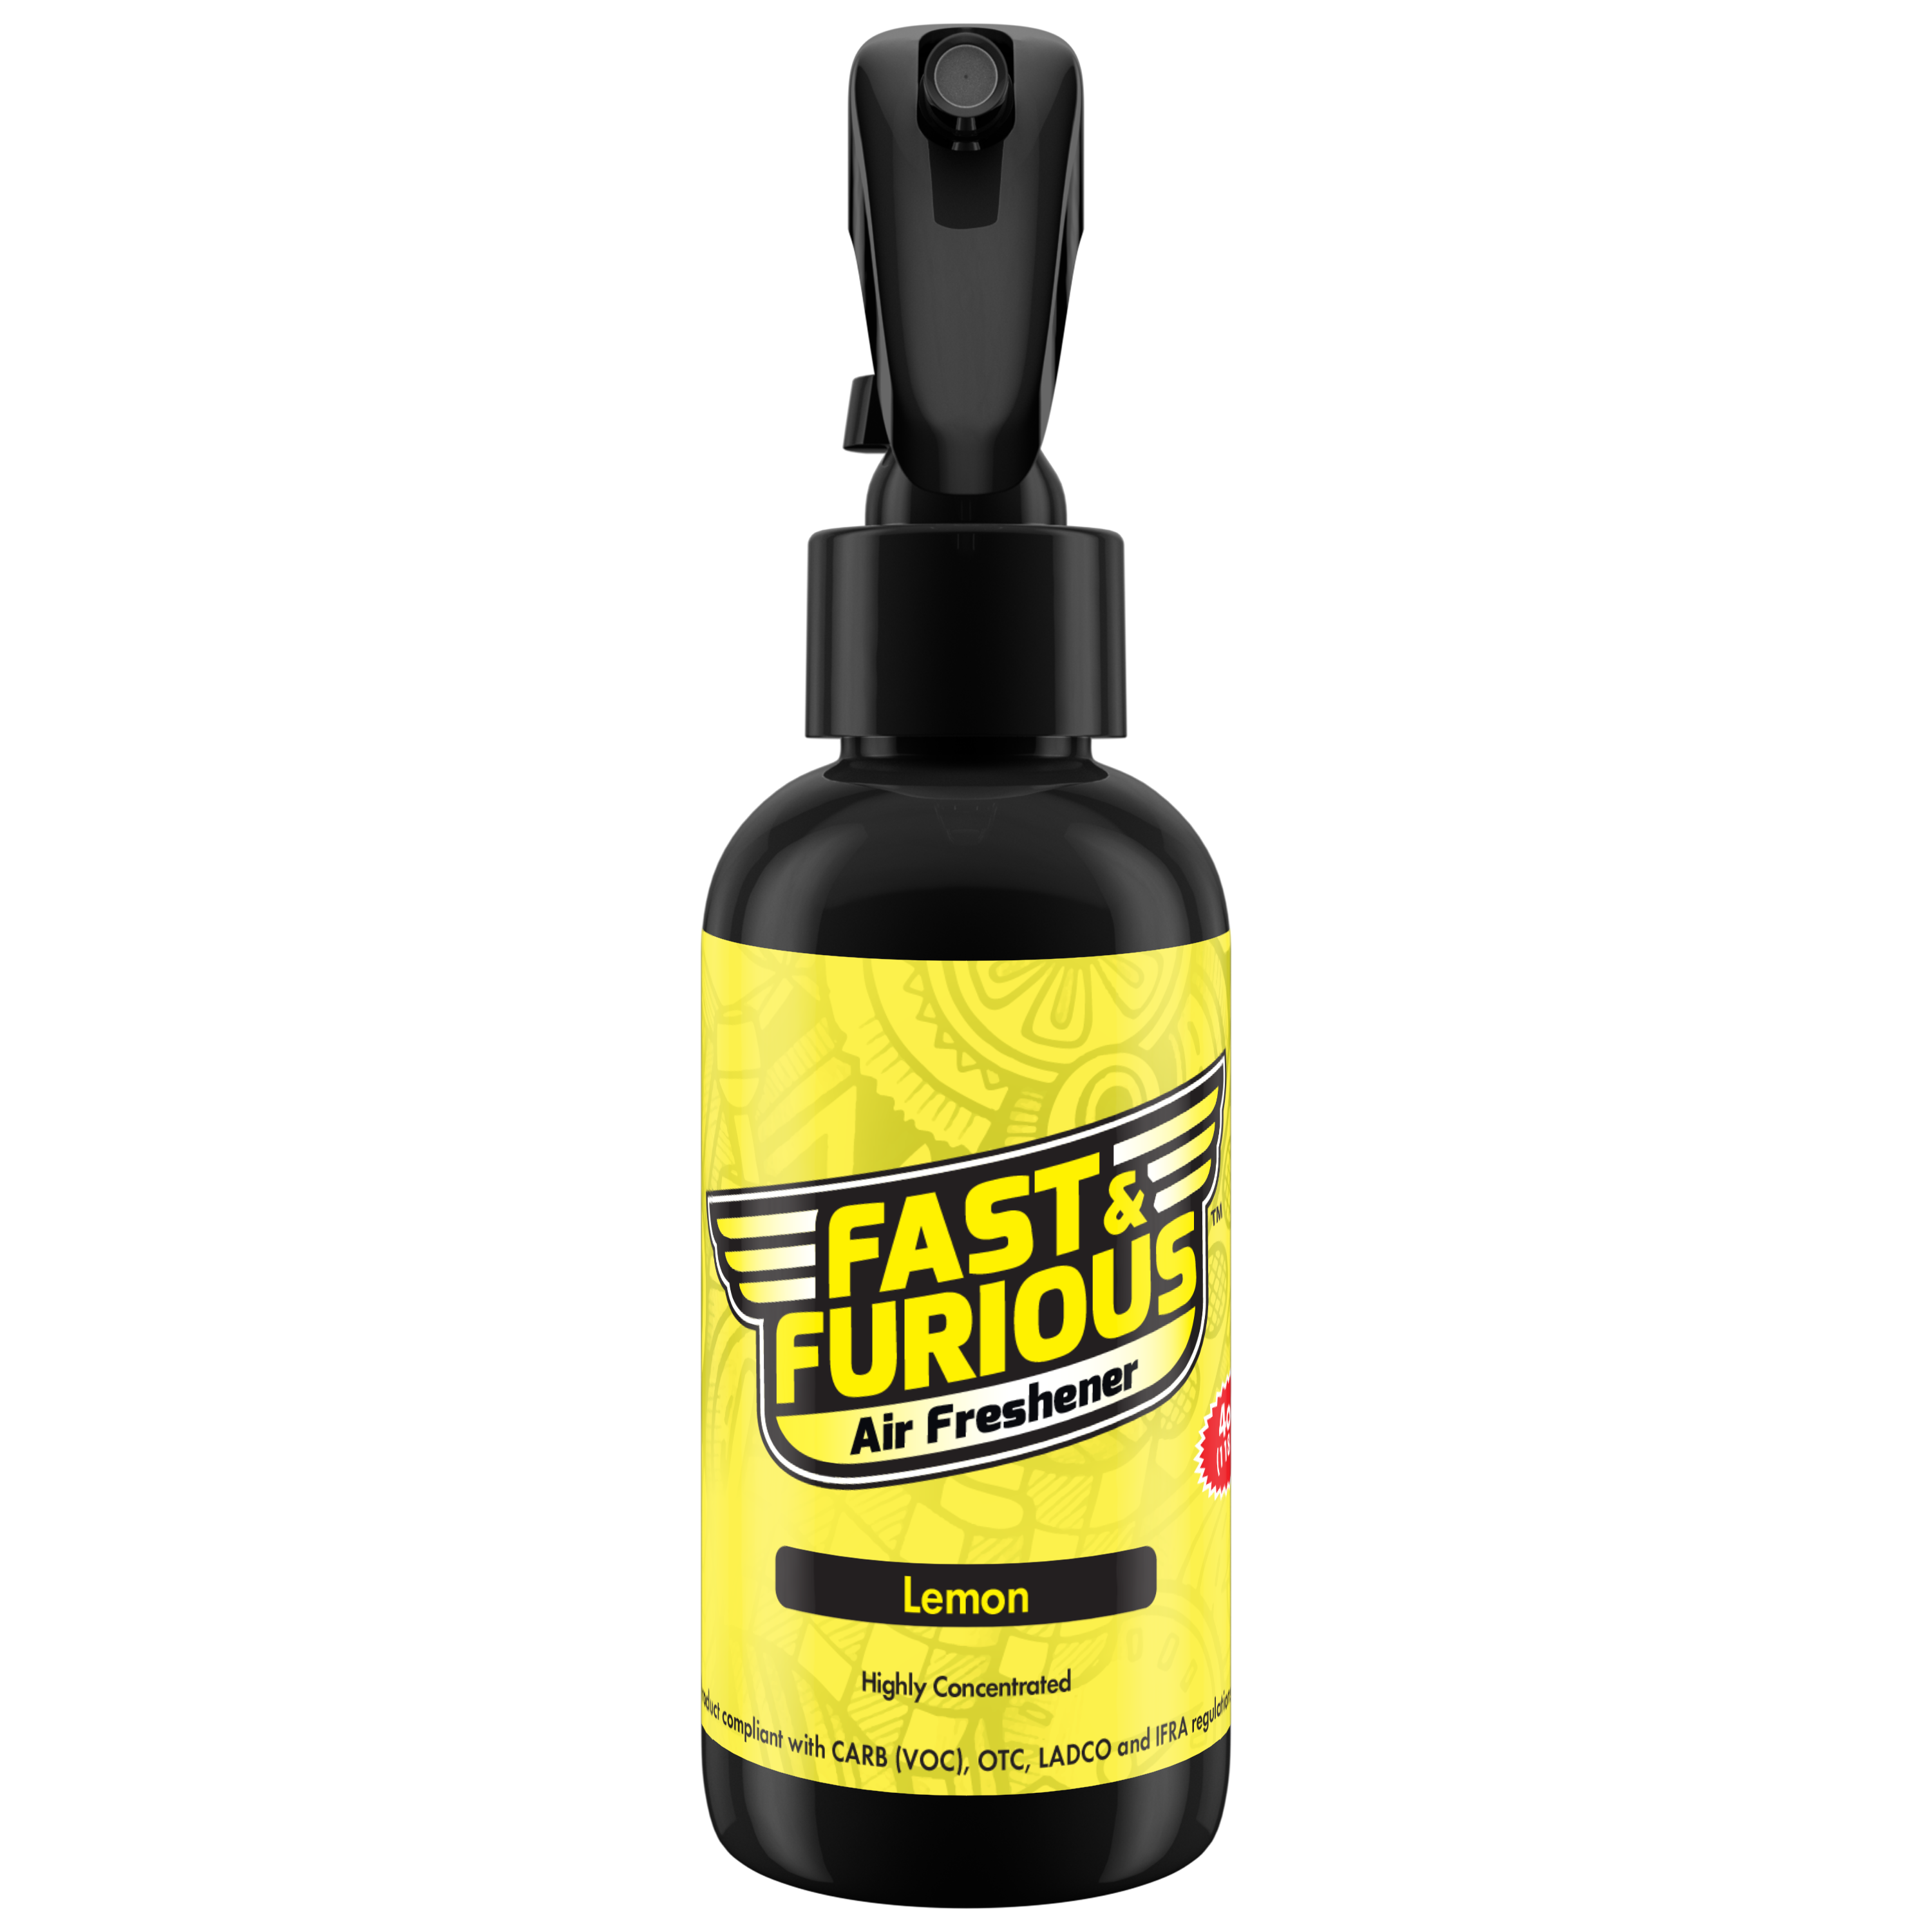 Fast and Furious Air Freshener - Lemon Scent